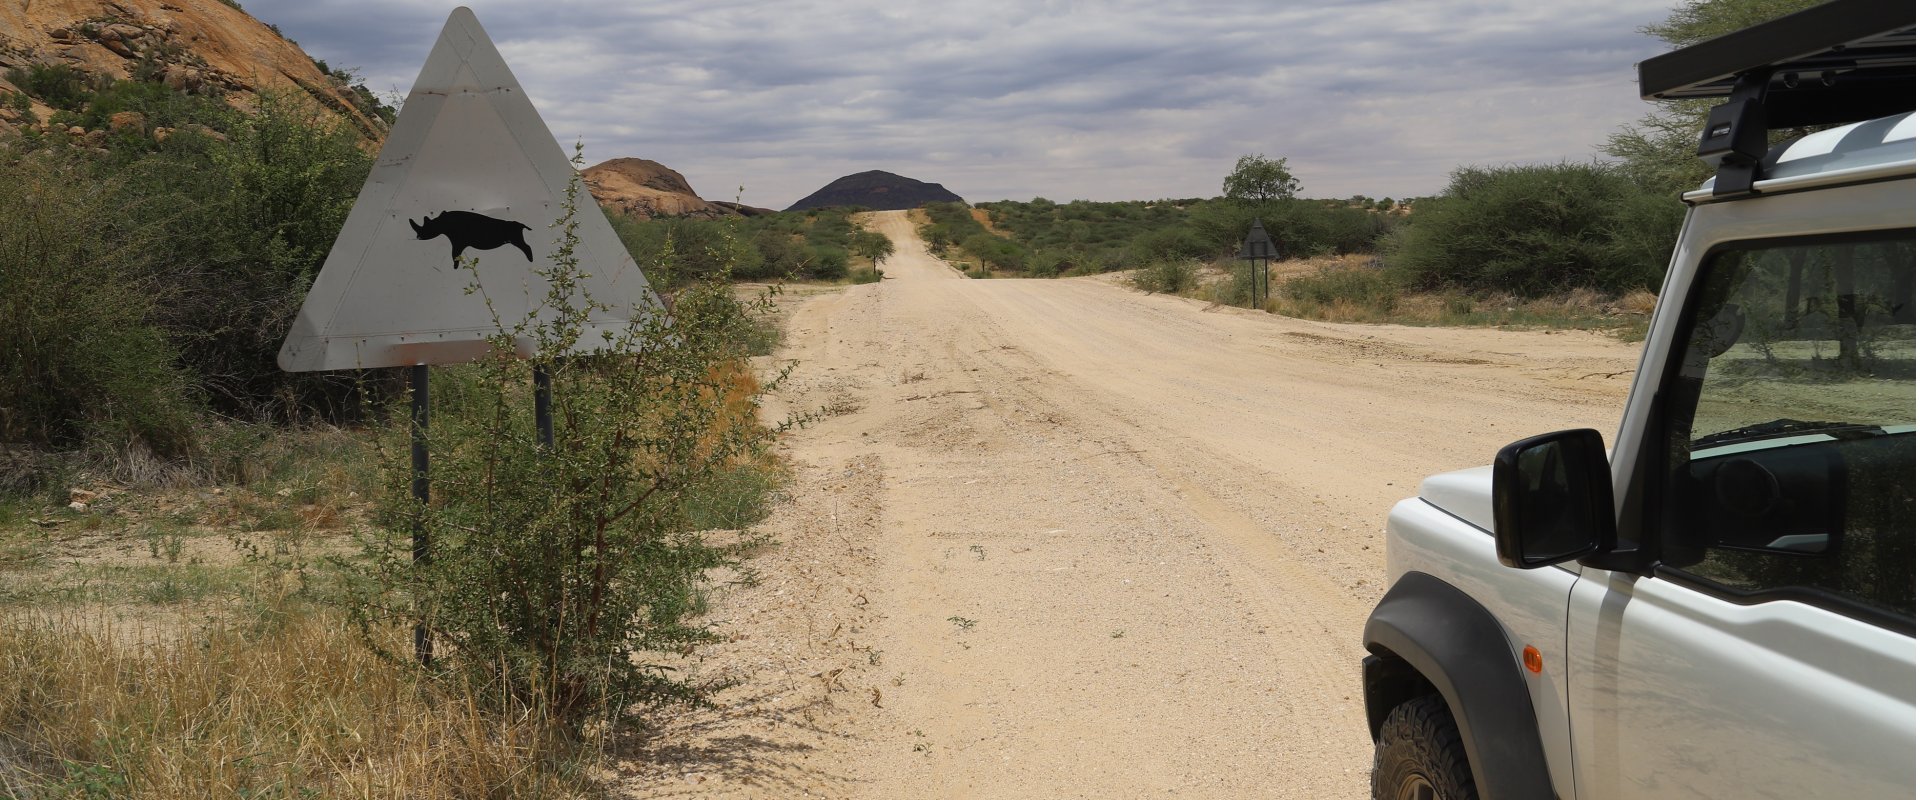 local-travel-namibia-car-rental-namibian-desert-road-with-a-sign